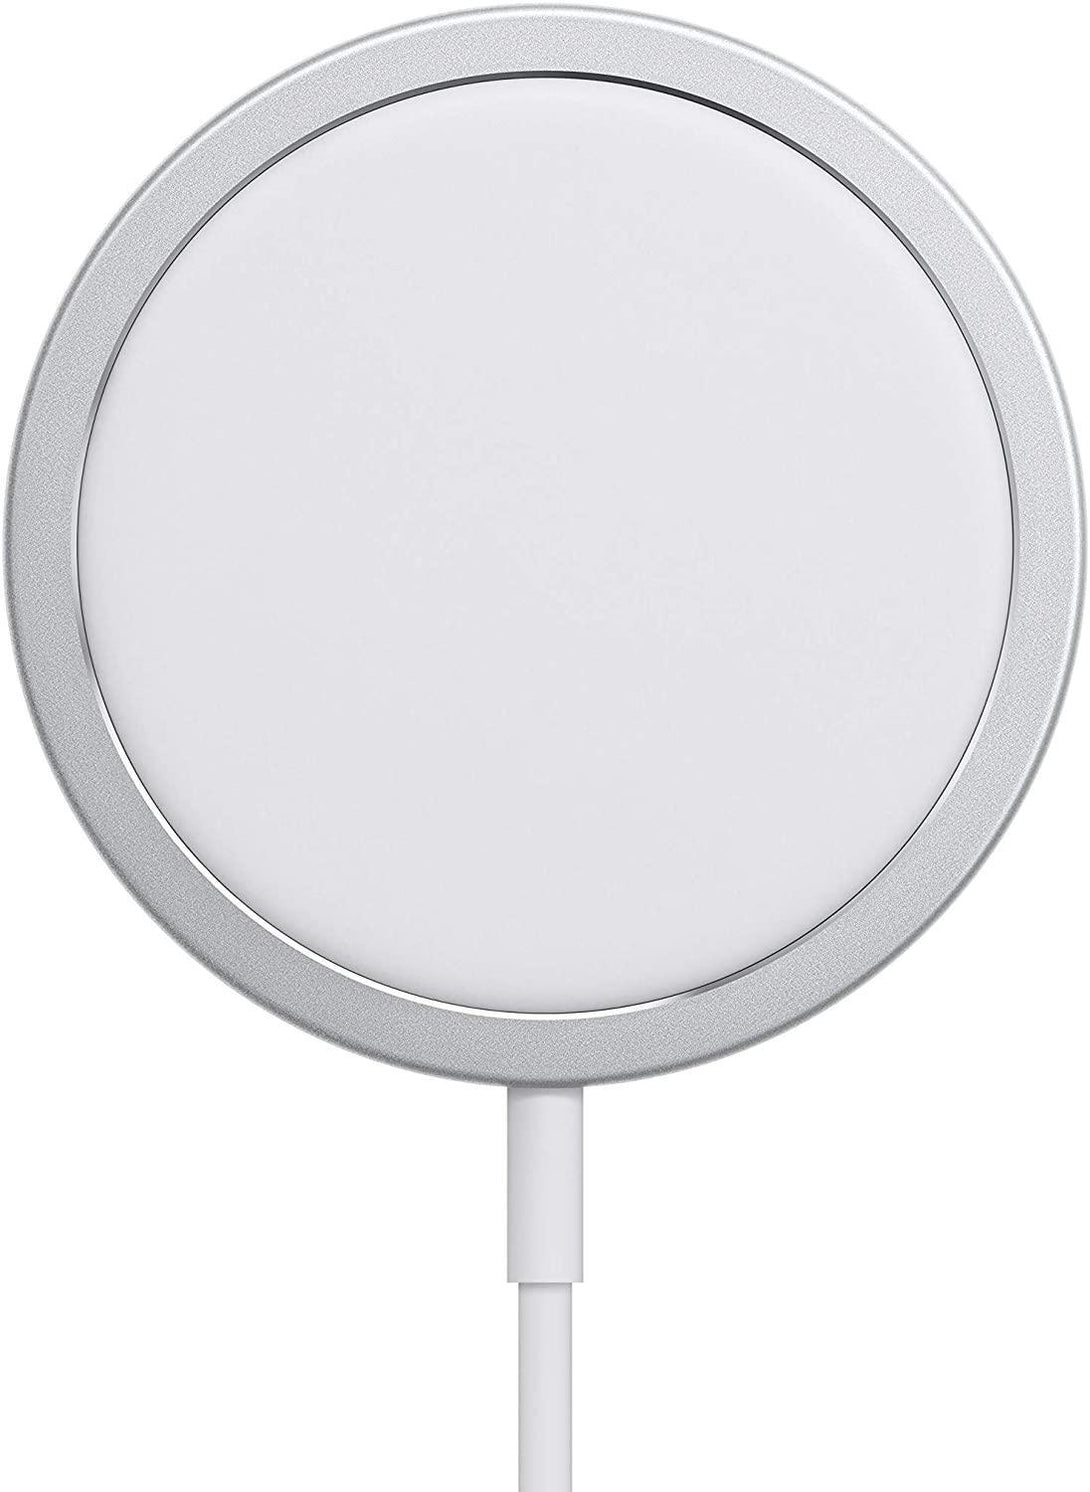 Apple MagSafe Charger - White - Tech Goods